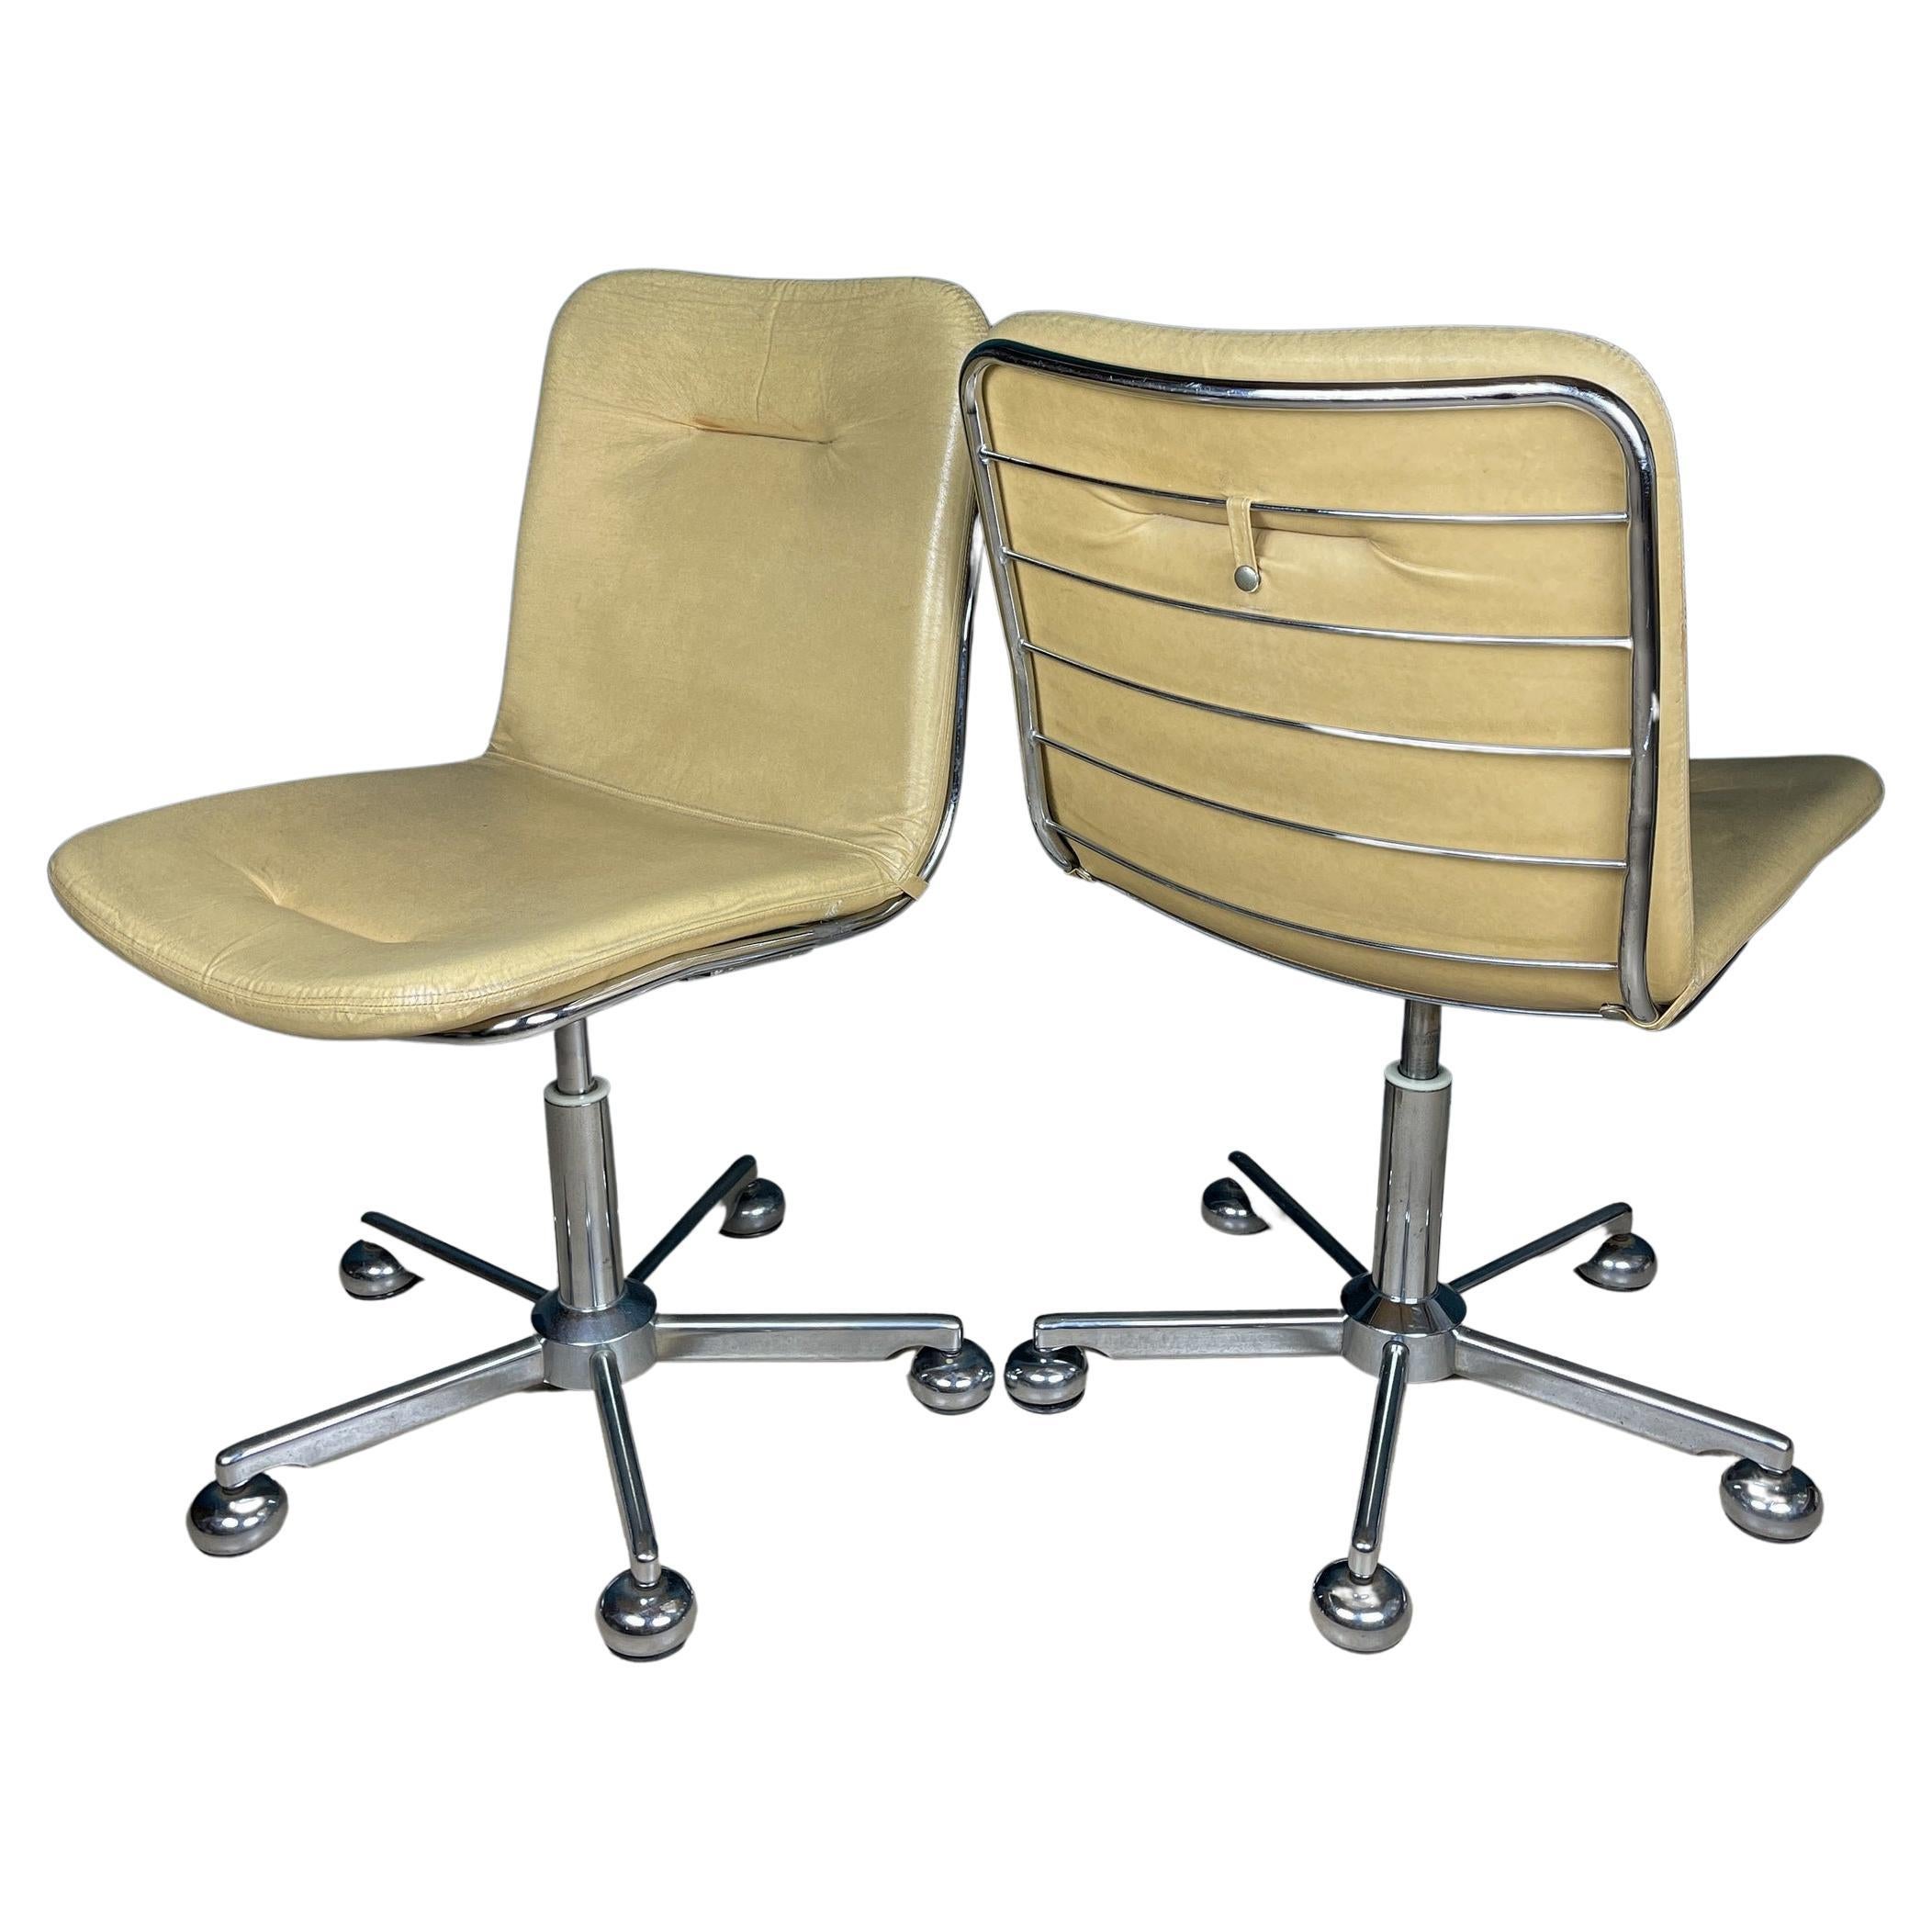 Vintage Italian Desk Chairs Italy 1970s Set of 2 Style Gastone Rinaldi For Sale